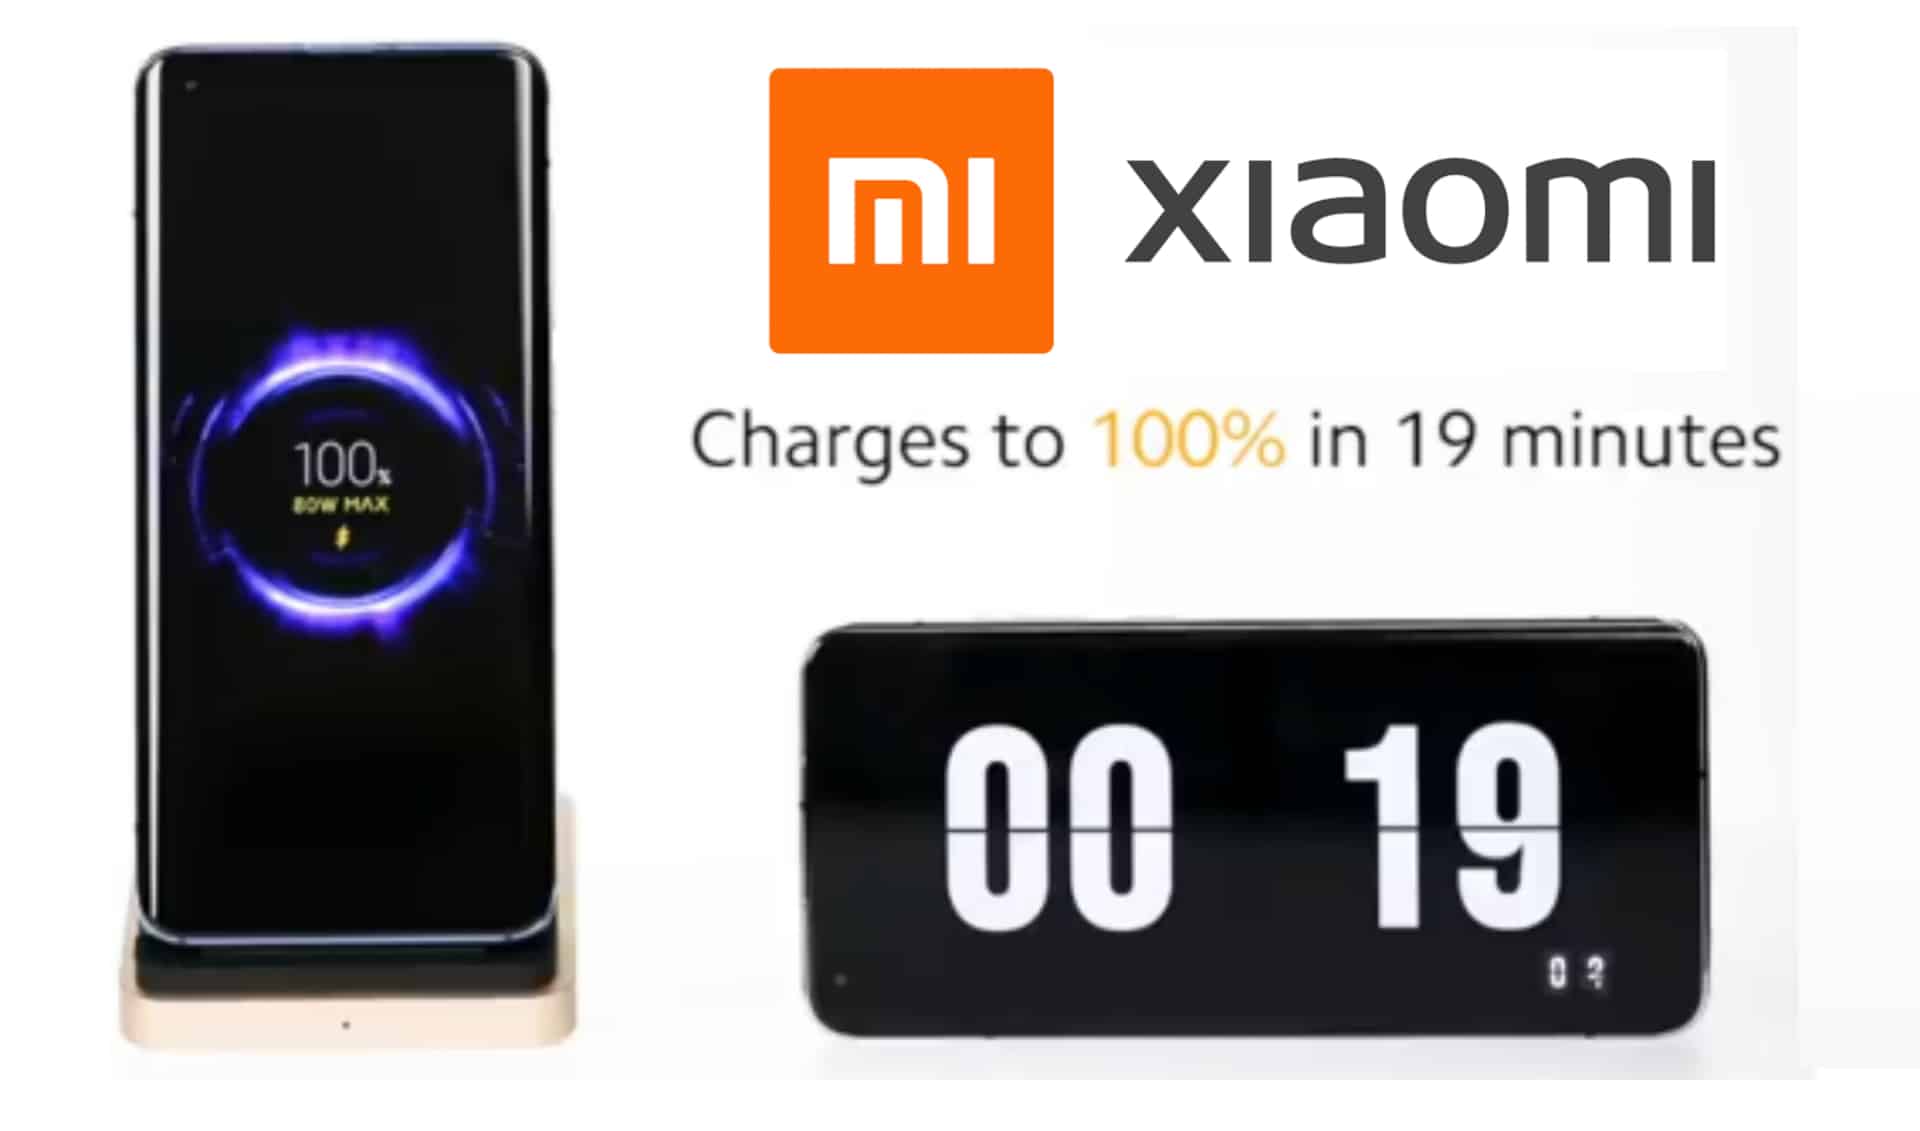 Xiaomi Introduces Pioneering 80W Wireless Charging Technology, 100% Charge in Just 19 Minutes